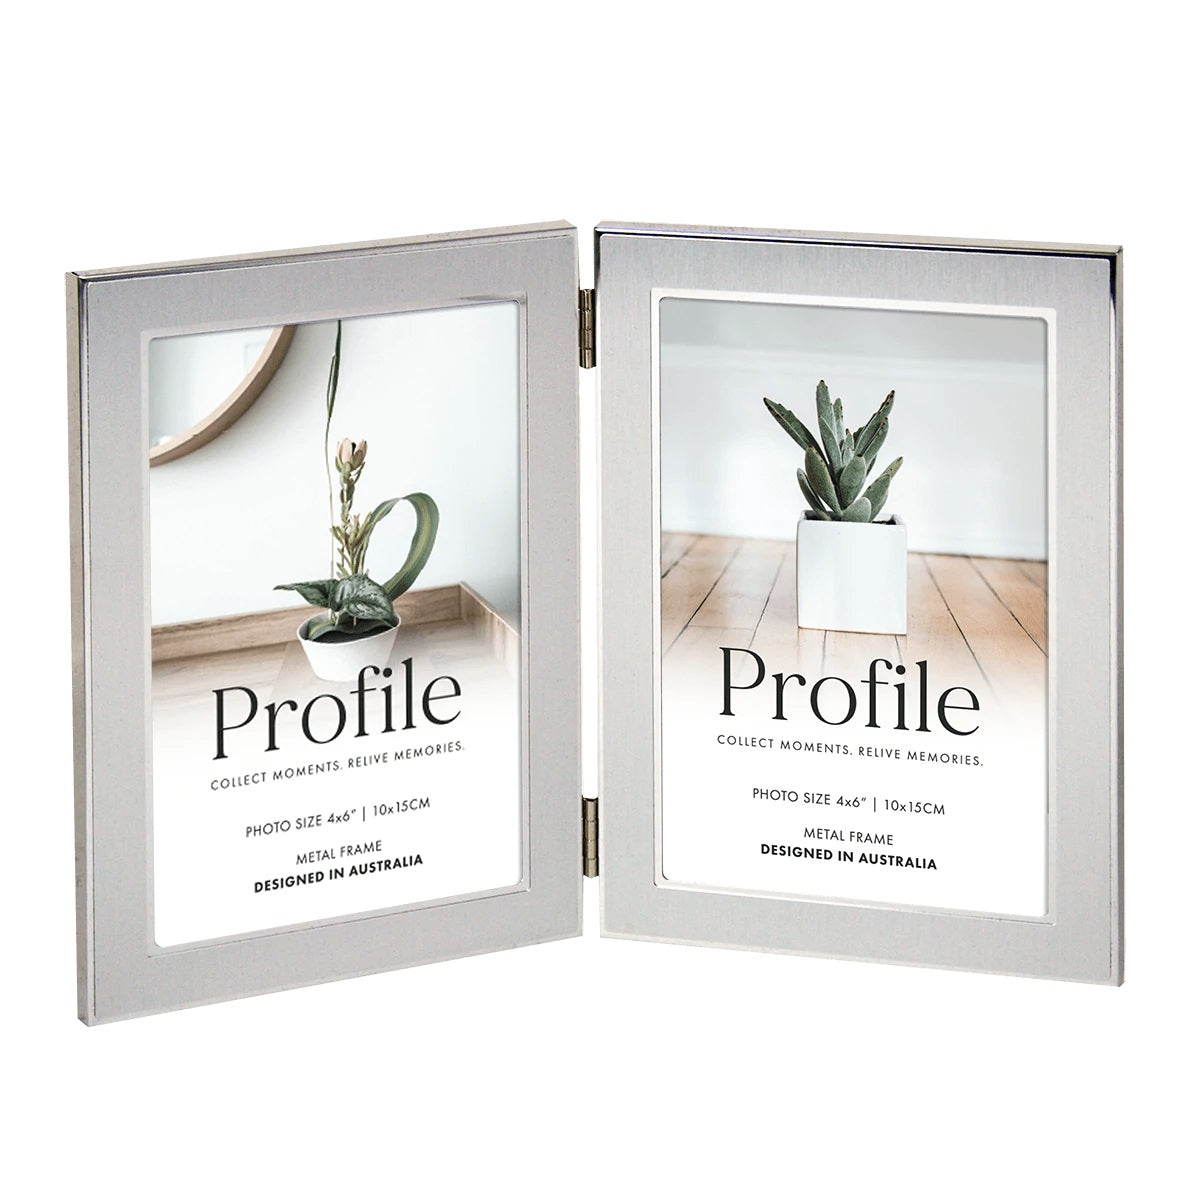 Profile Eternal Silver Hinged Metal Photo Frame 4x6 Double Vertical